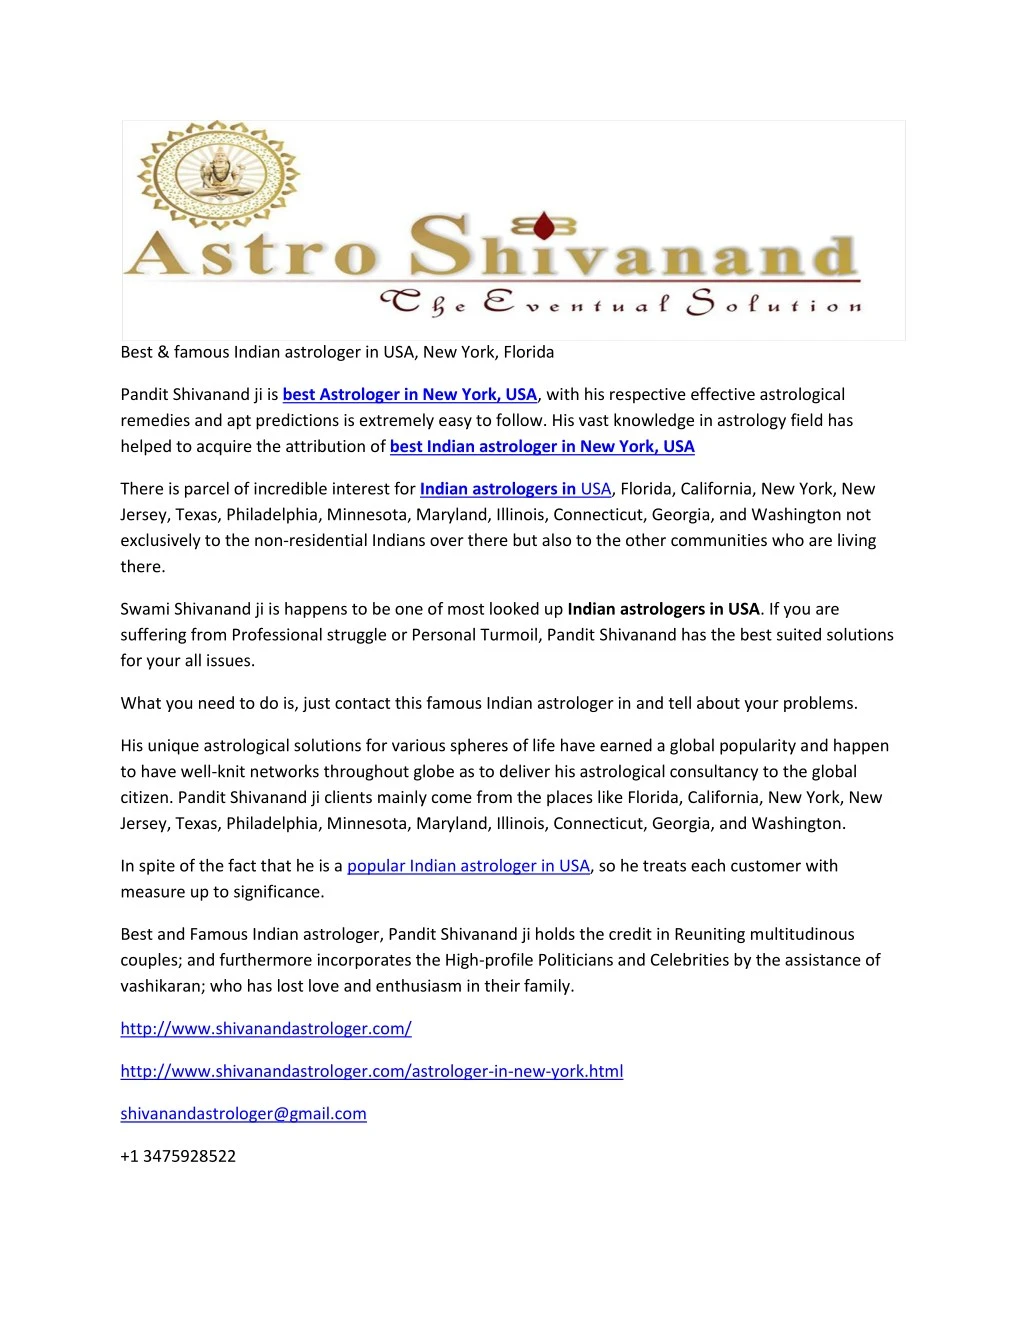 best famous indian astrologer in usa new york